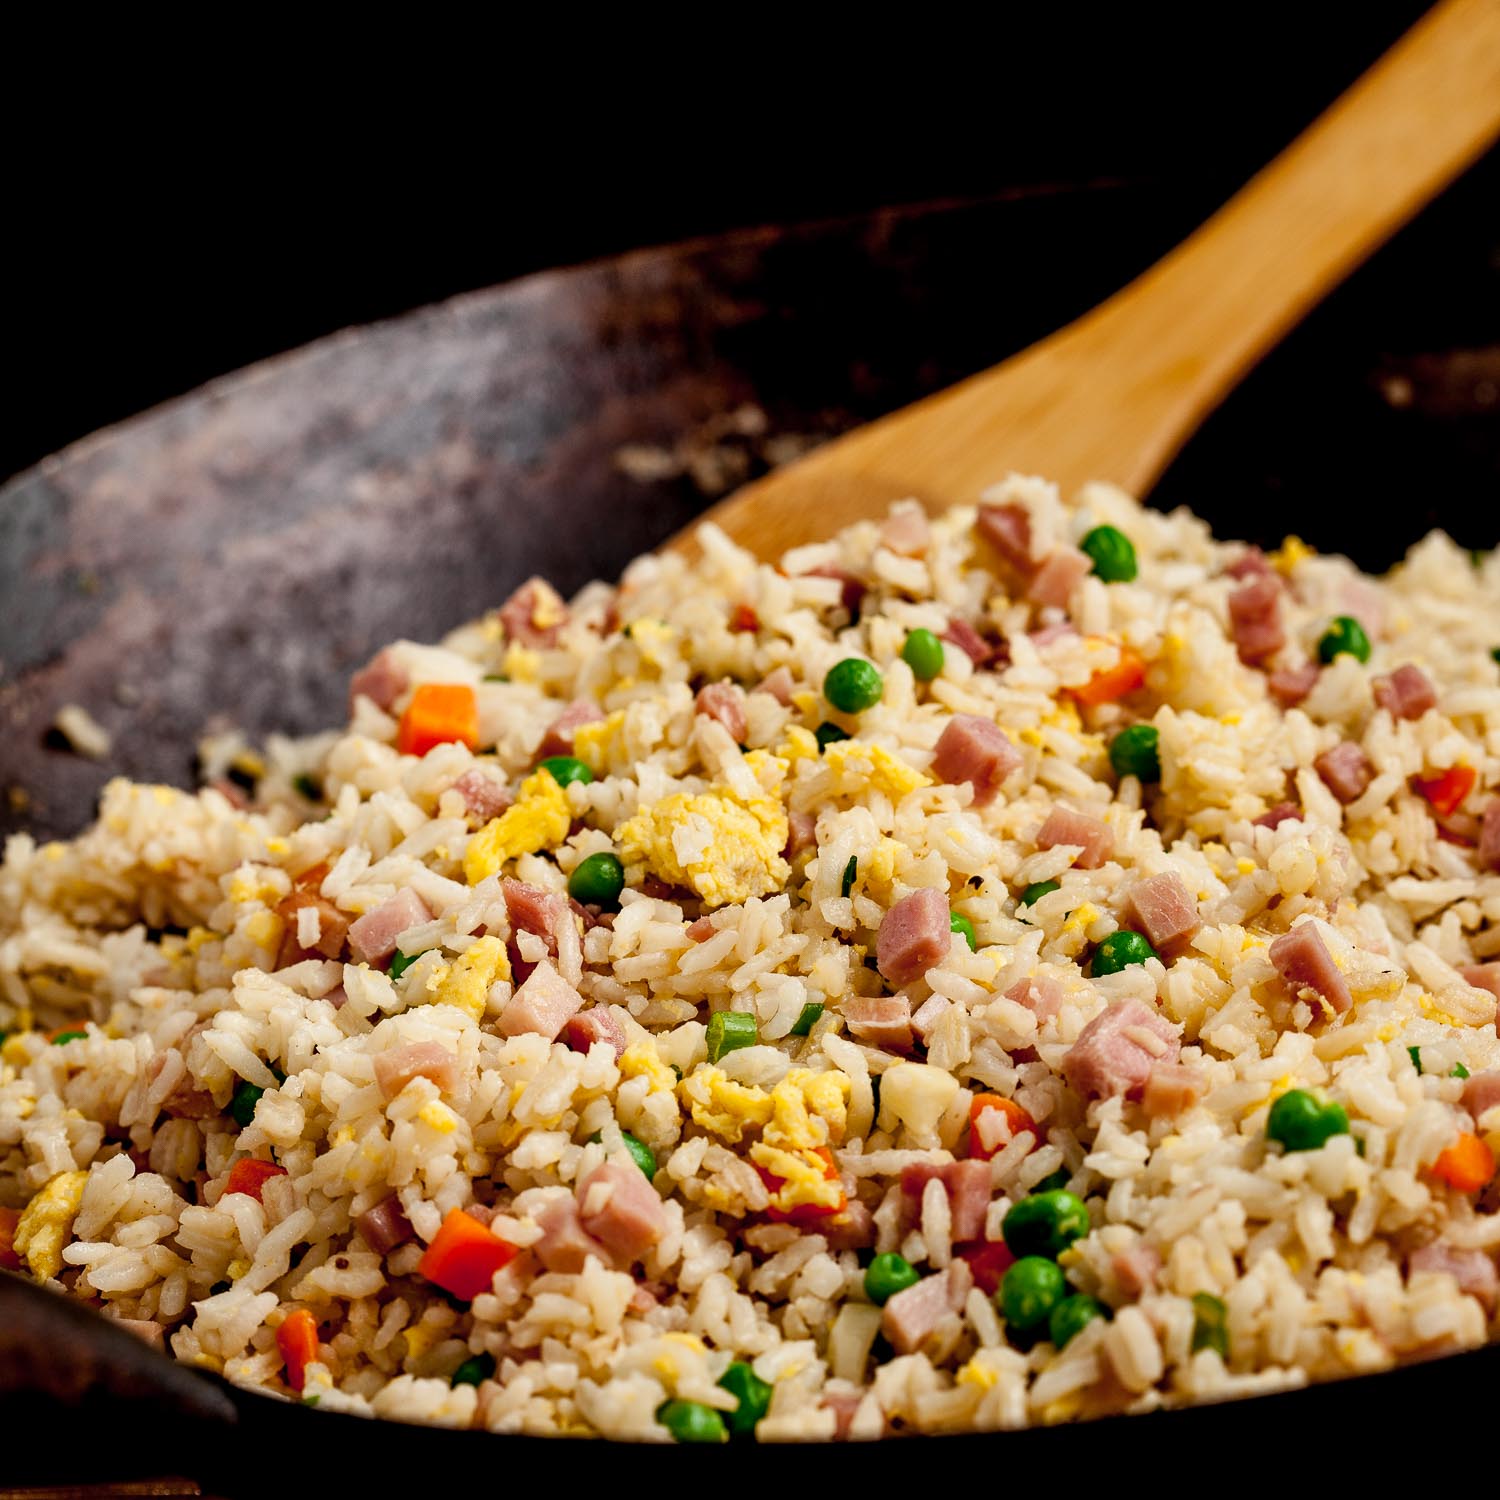 https://www.chewoutloud.com/wp-content/uploads/2023/01/Easy-Fried-Rice-in-a-Wok-Square.jpg